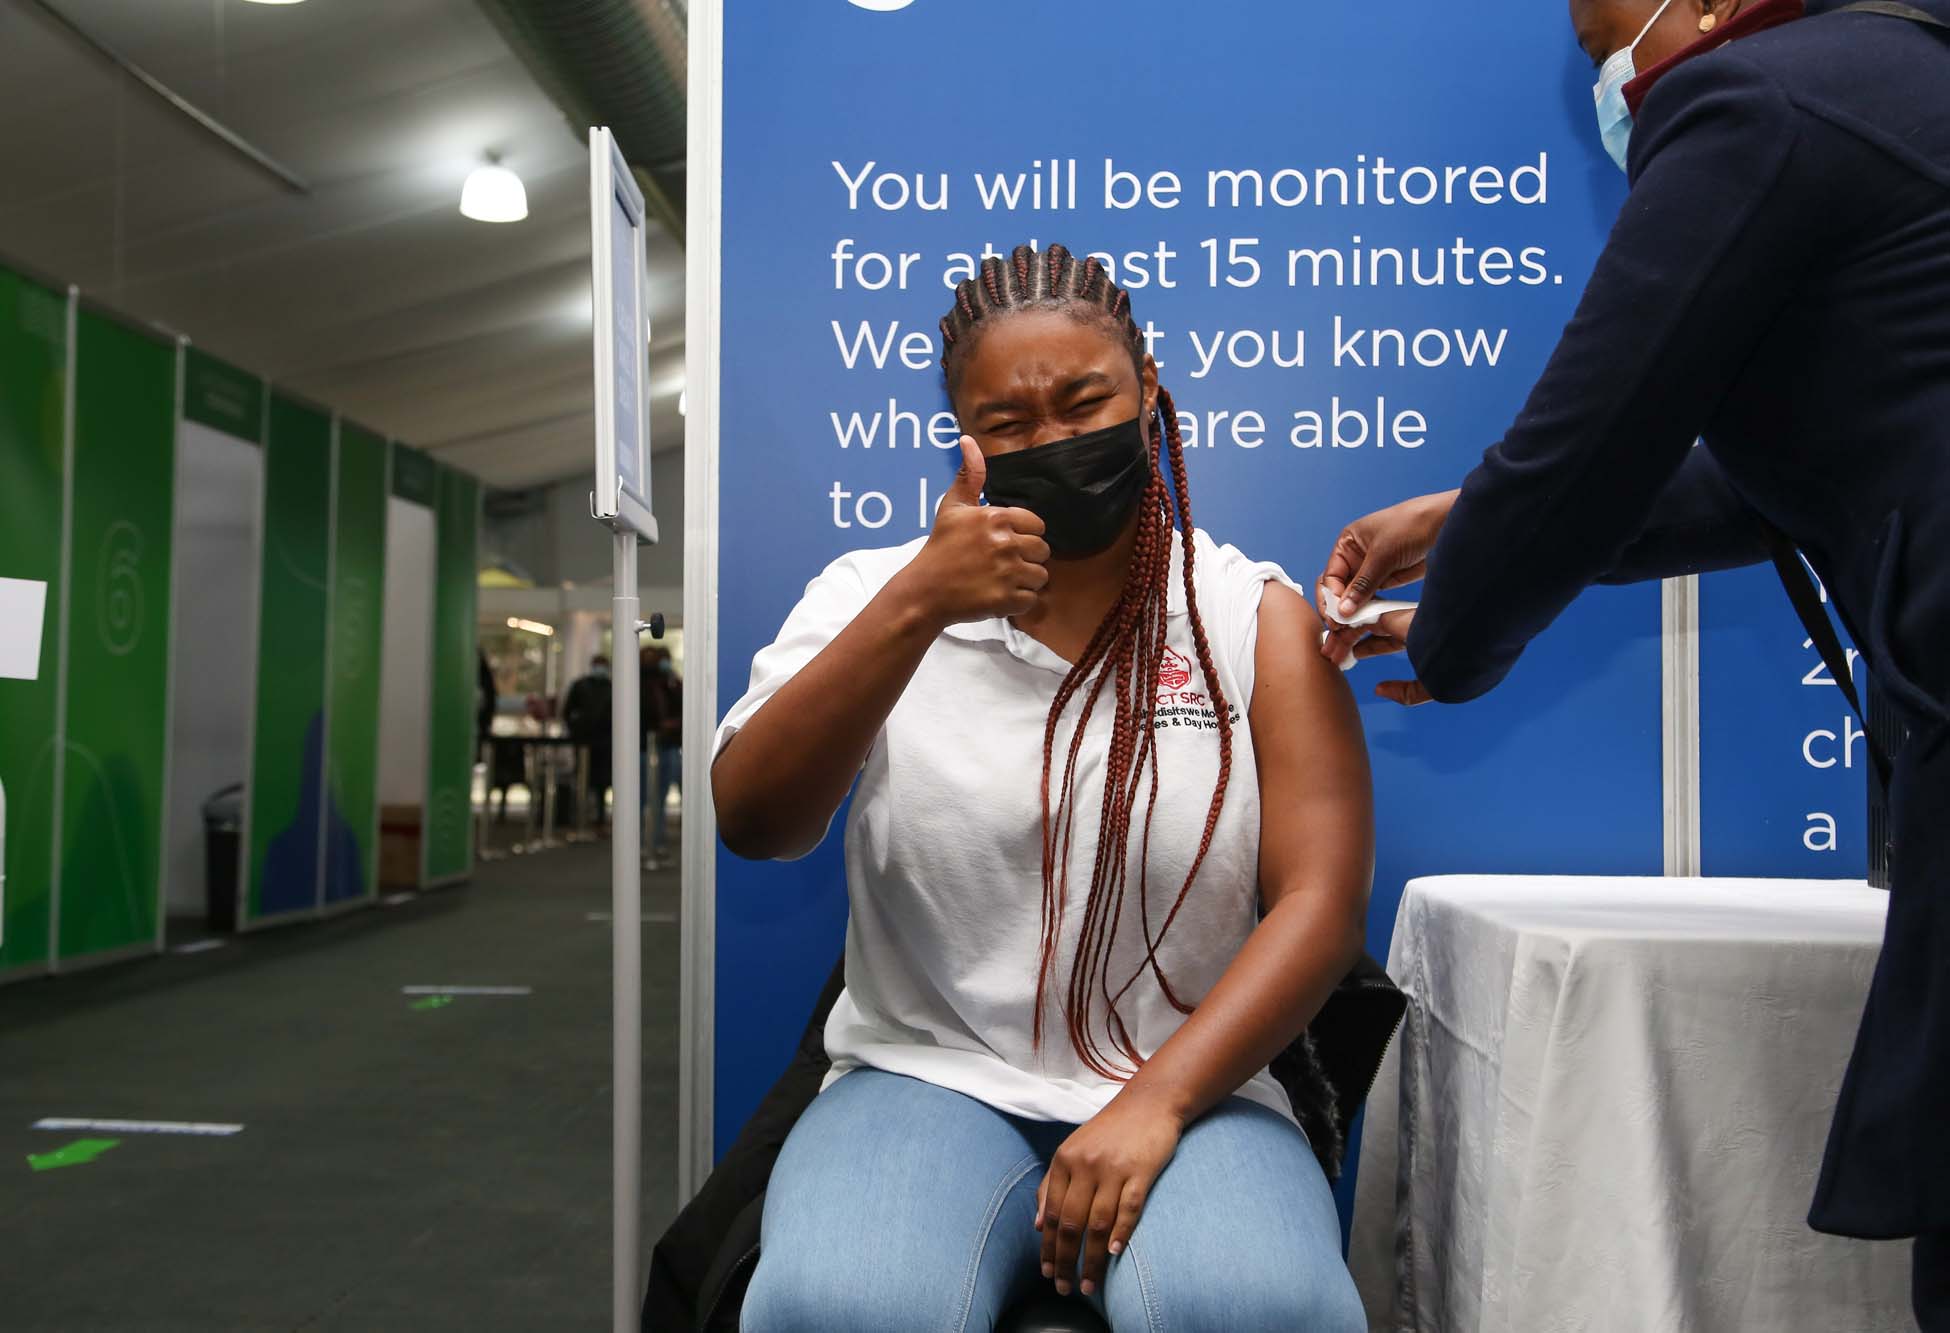 The UCT Community of Hope Vaccination Centre was launched at Forest Hill. Photos were taken on 30 August 2021.